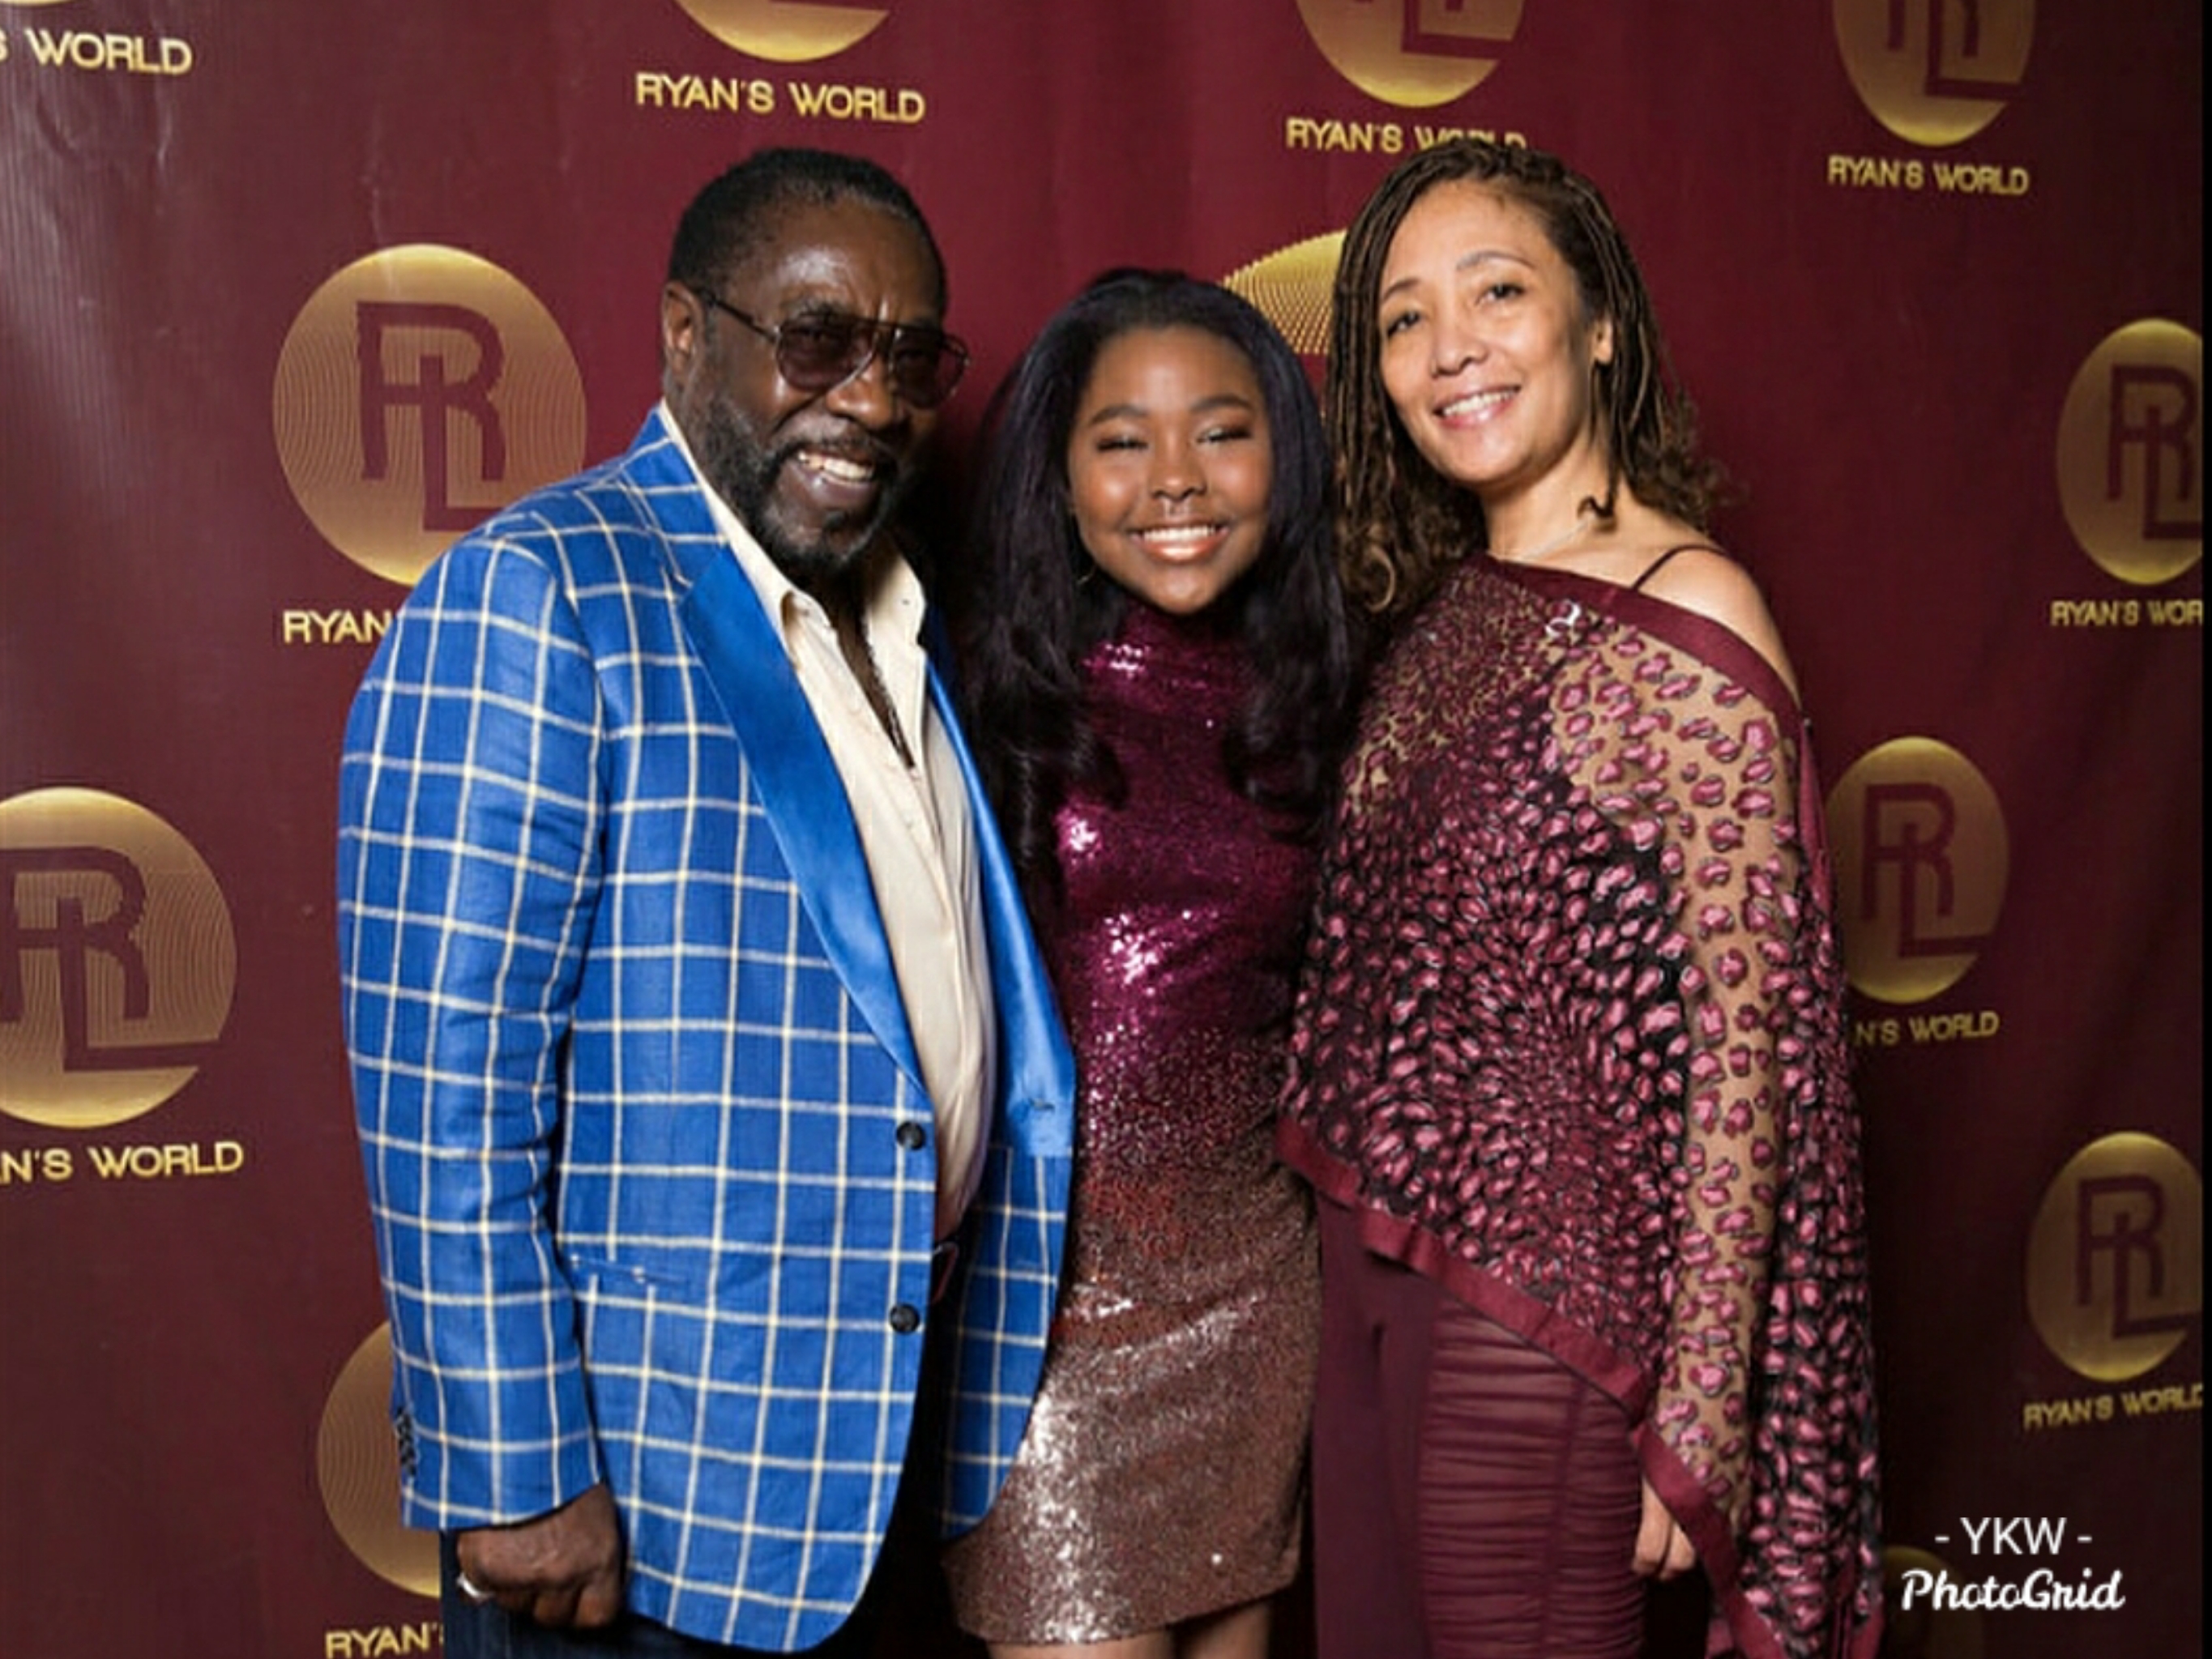 Eddie Levert Shows Off Dancing Moves In New Tik Tok Video With Wife And Daughter